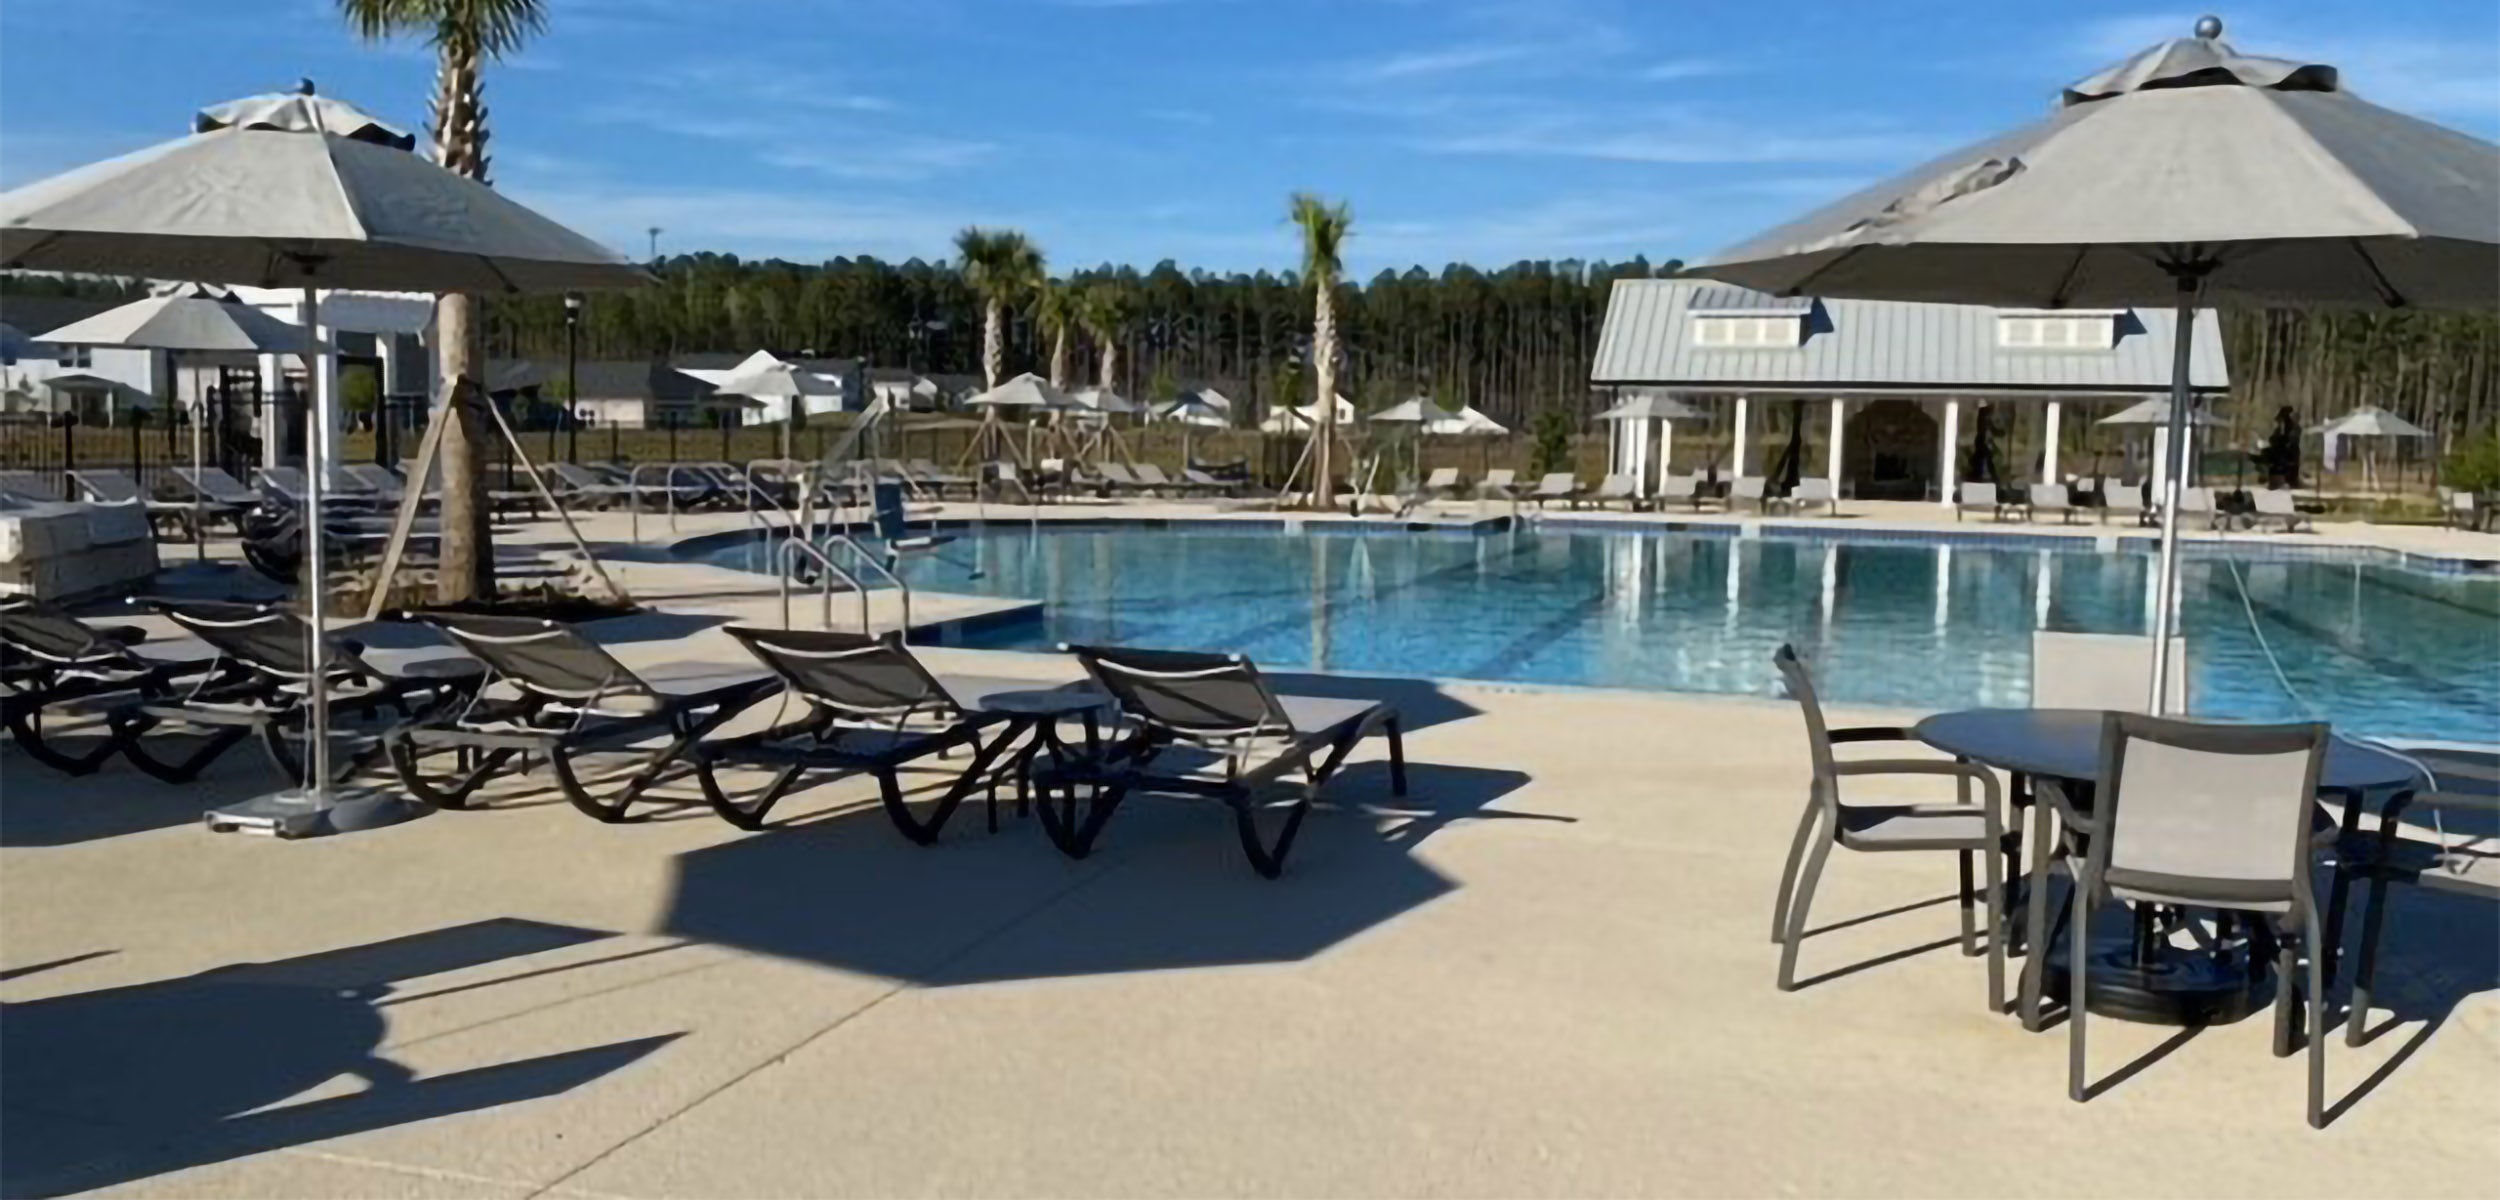 Sunset Chaise Lounges and Armchairs at Waston Hill's Pool